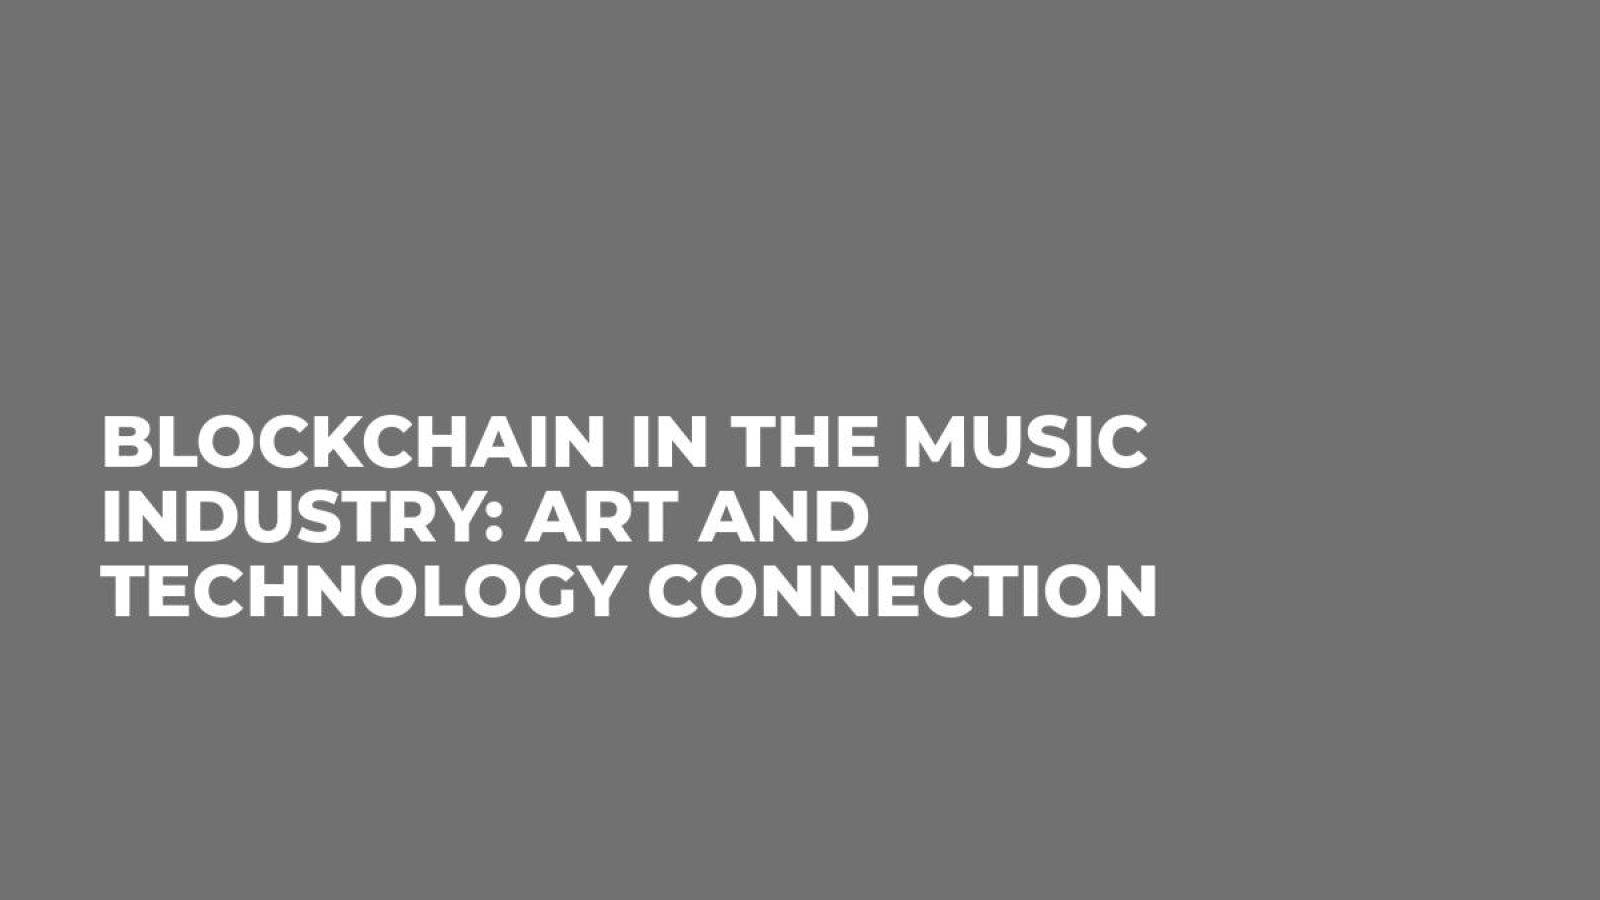 Blockchain in the Music Industry: Art and Technology Connection